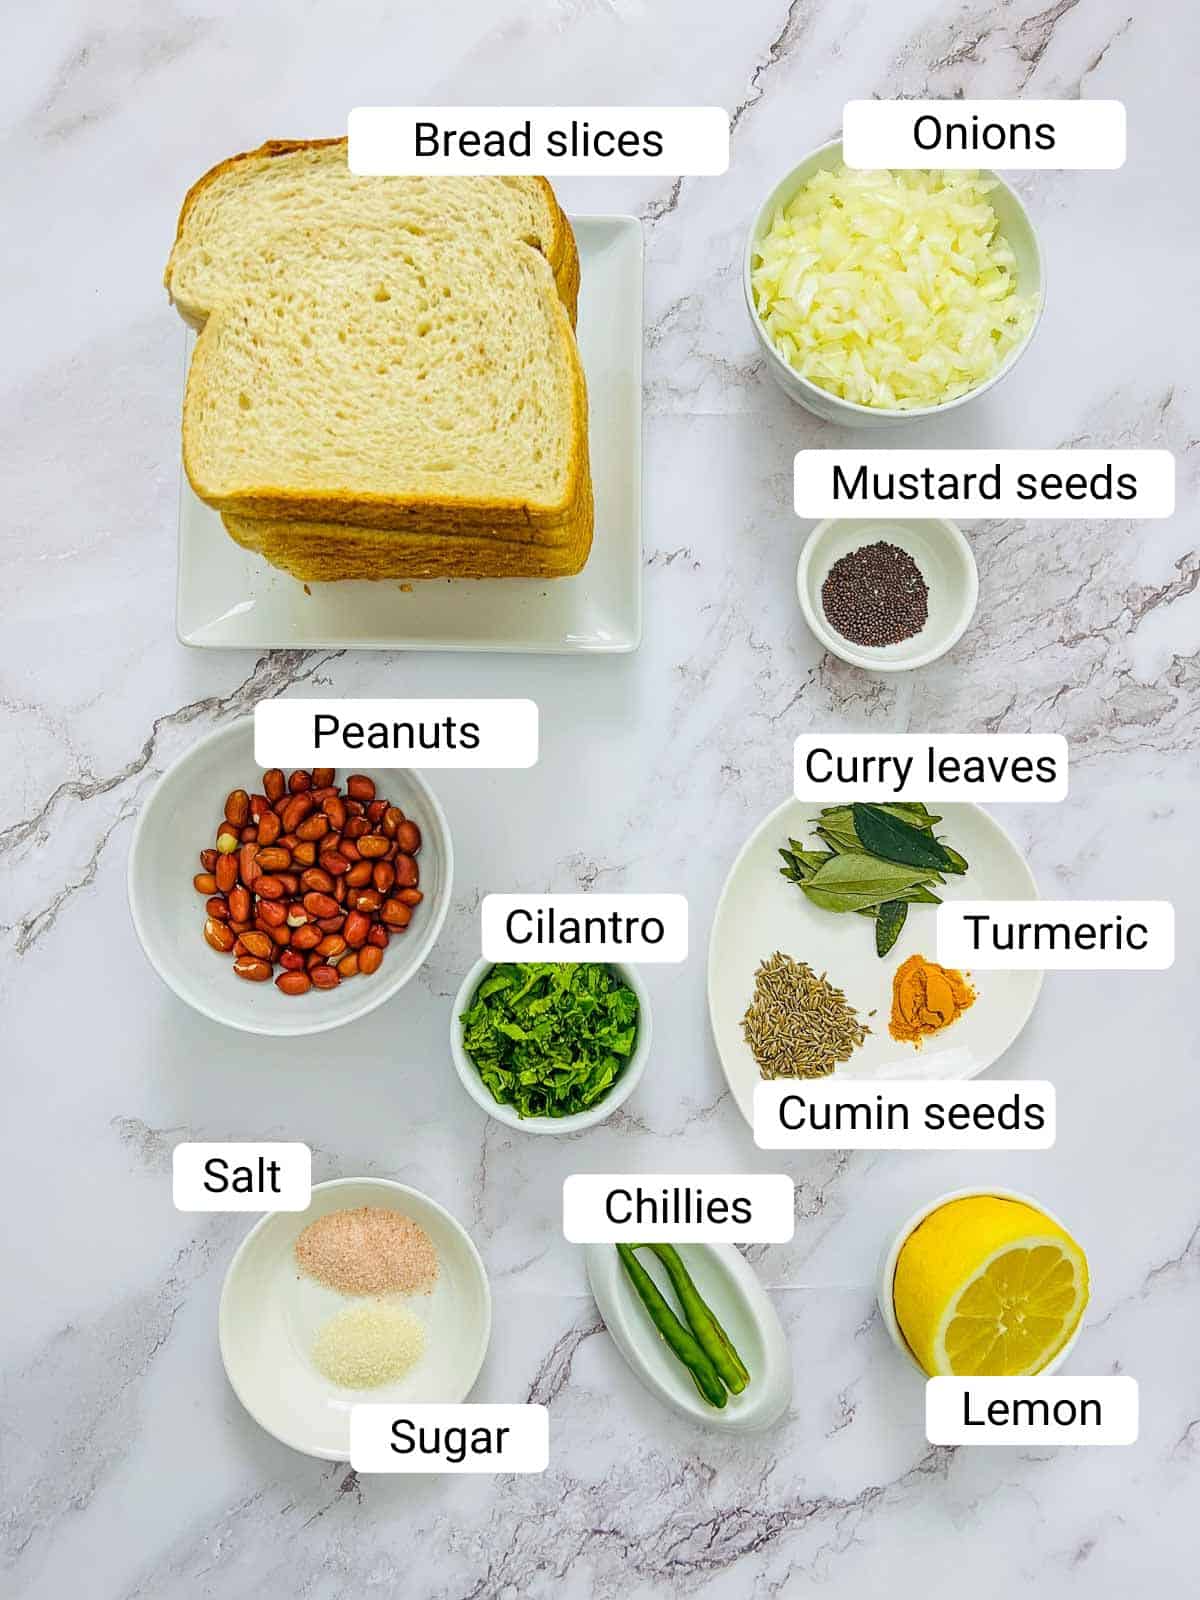 Ingredients to make bread upma placed on a marble surface.